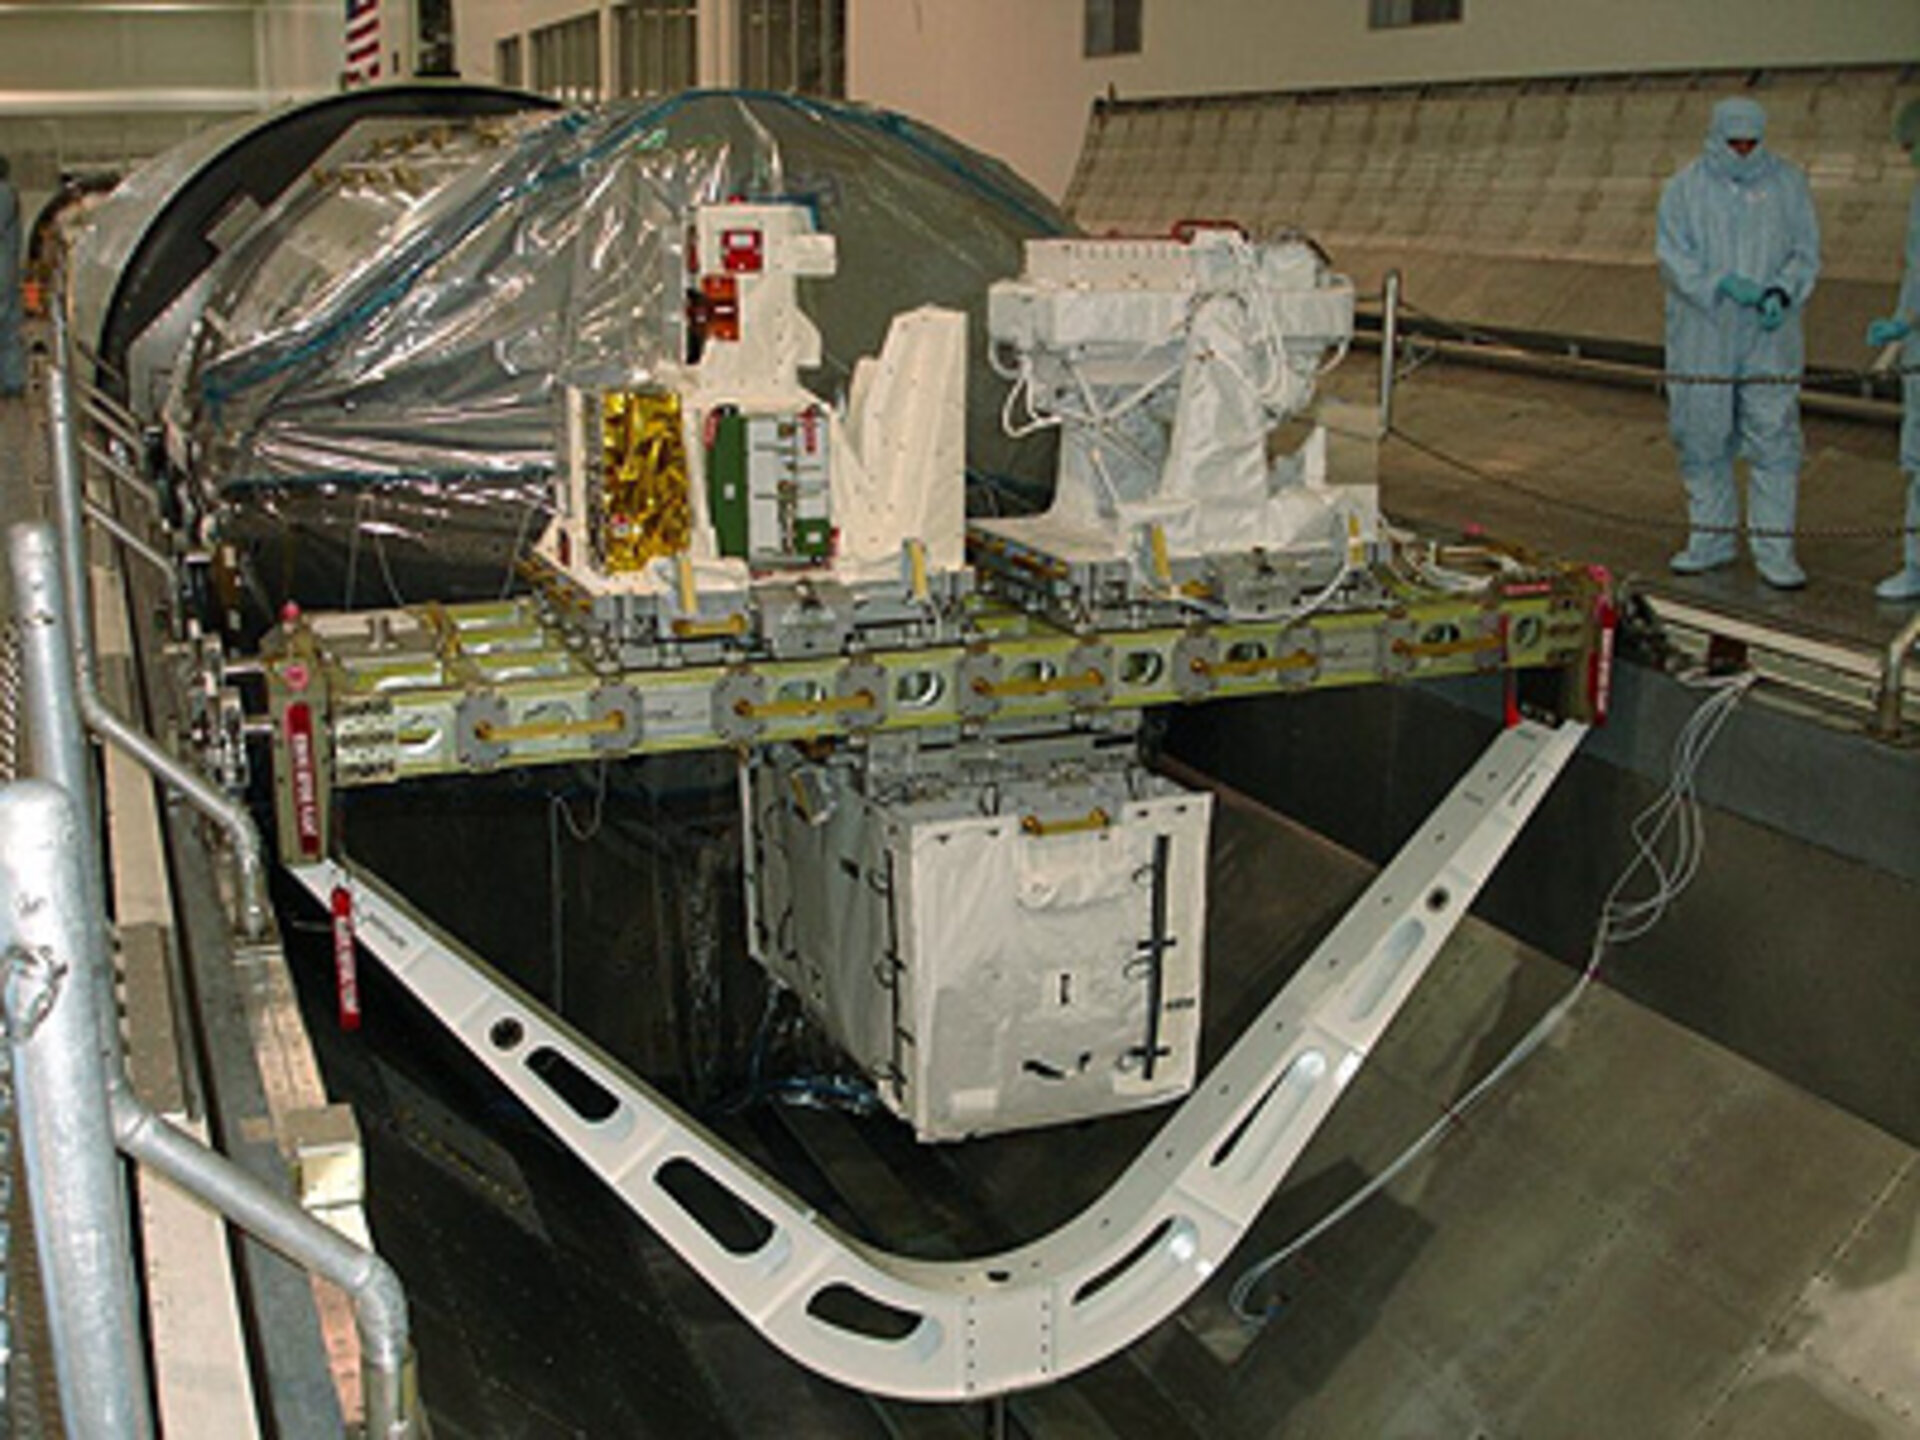 The Columbus external facilities, Solar and EuTEF, in the Shuttle's payload canister at NASA's Kennedy Space Center, Florida